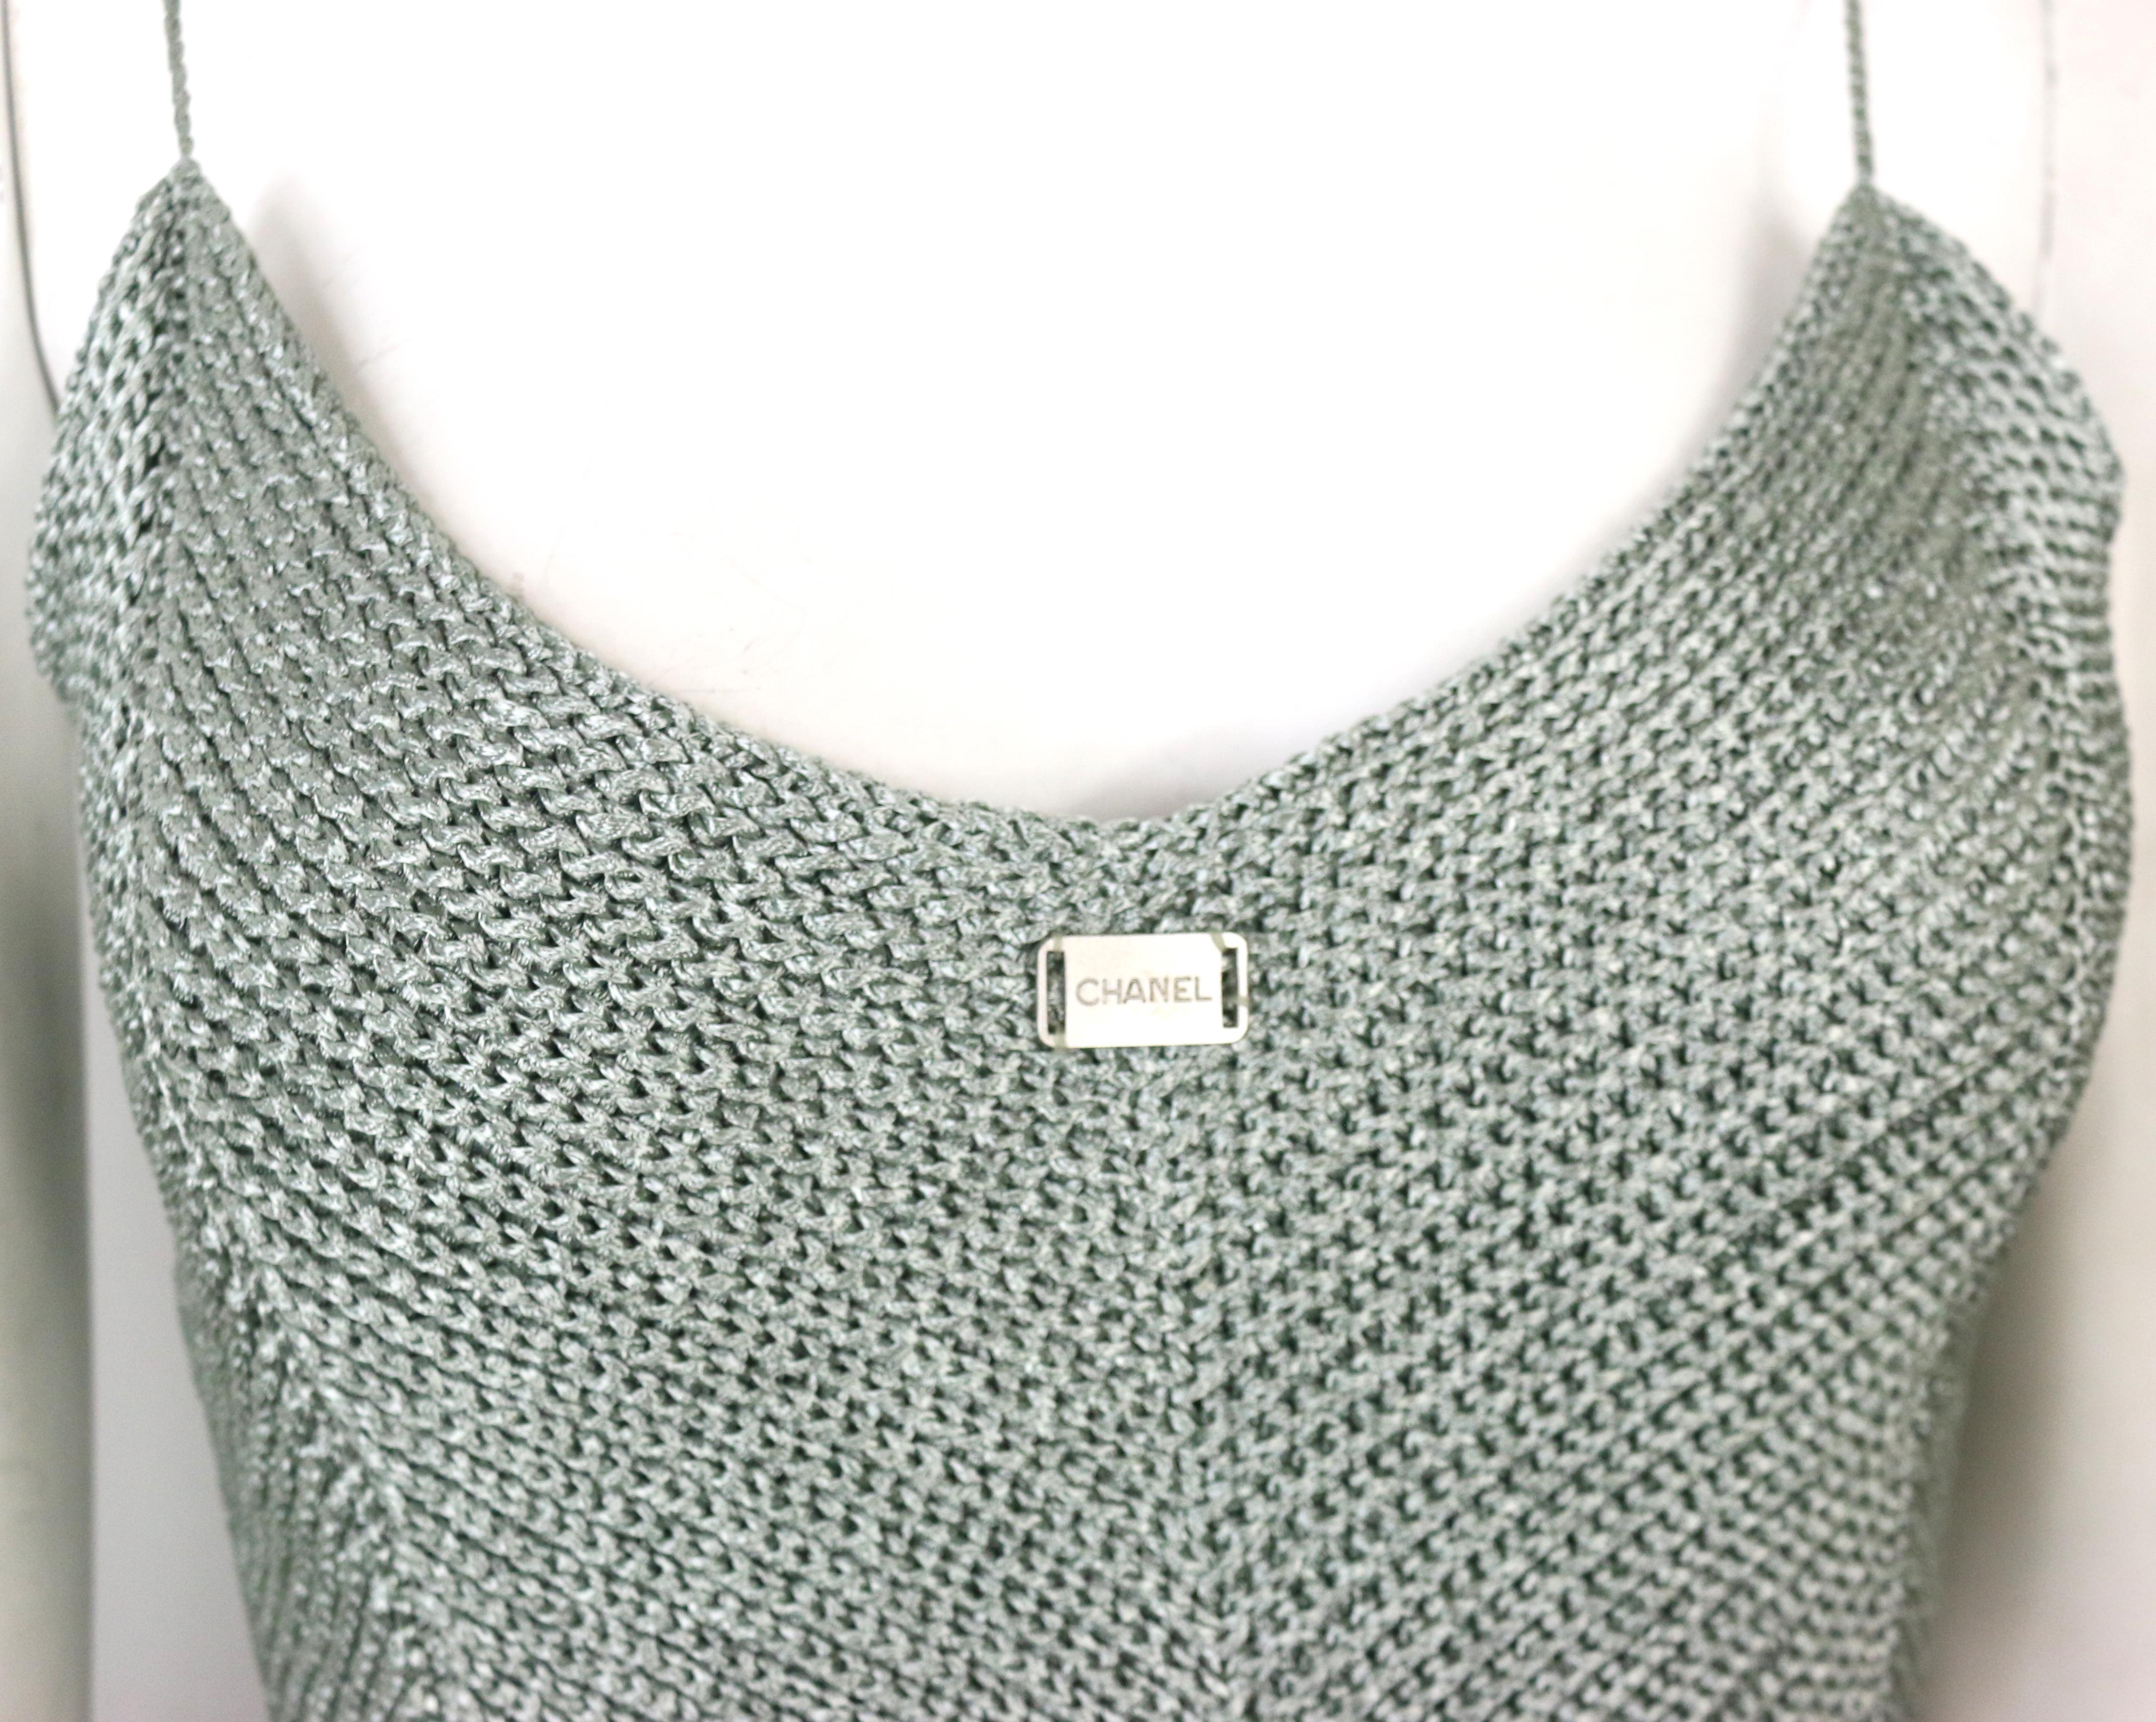 - Vintage Chanel silver knitted scalloped cropped vest top from spring 1999 collection. 

- Size 38. 

- 100% Rayon. 

